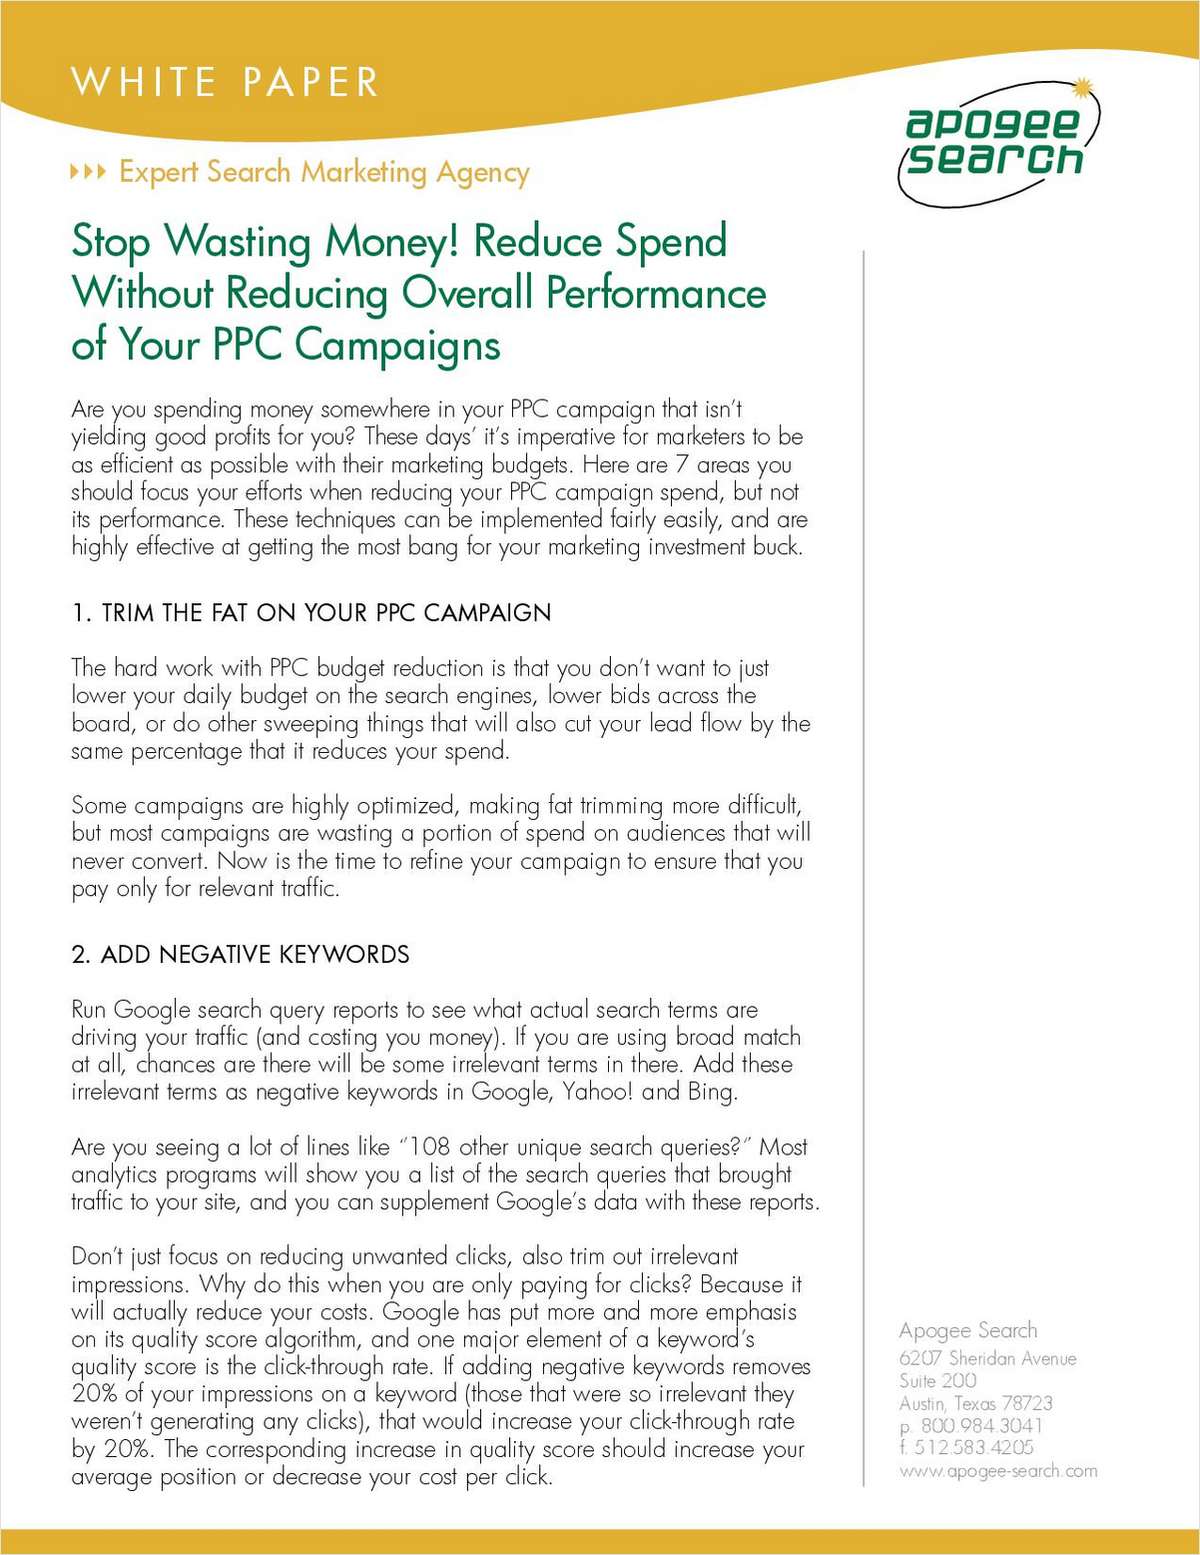 Stop Wasting Money! Reduce Spend without Reducing Overall Performance of Your PPC Campaigns